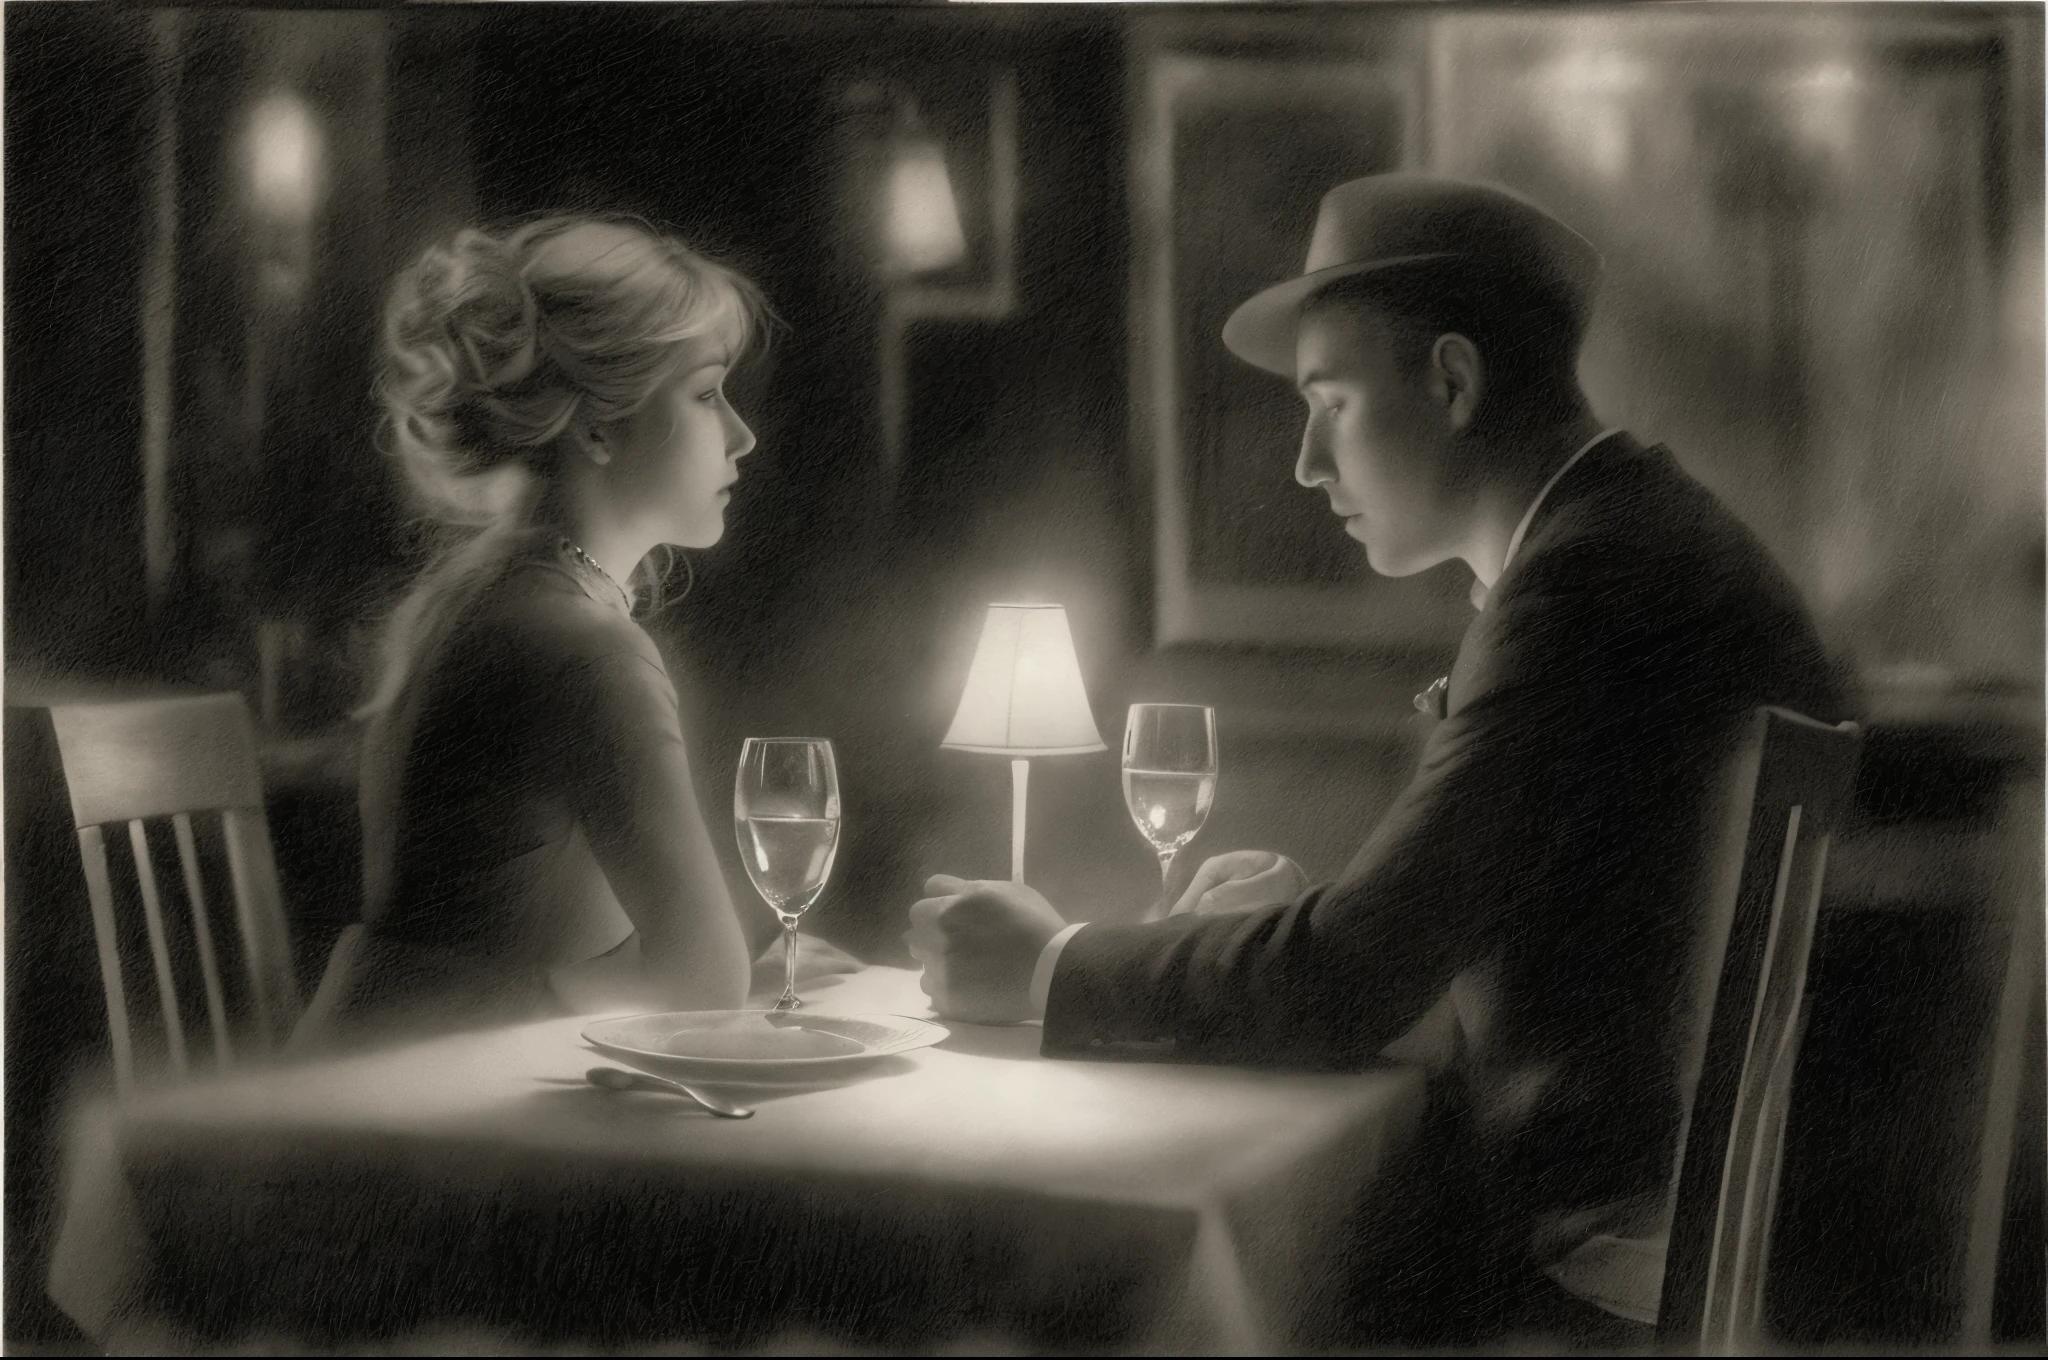 pencil drawing, obviously pencil texture, black and white, cinematic lighting, rough sketch, no detail, black background, Inspired by John Casper Fusili, Inspired by George Grosz, 兩個人dinner場景, Impressionism, author：Tadeusz Kanter, dinner, two people sitting at a table, on the table, romantic mood and tone